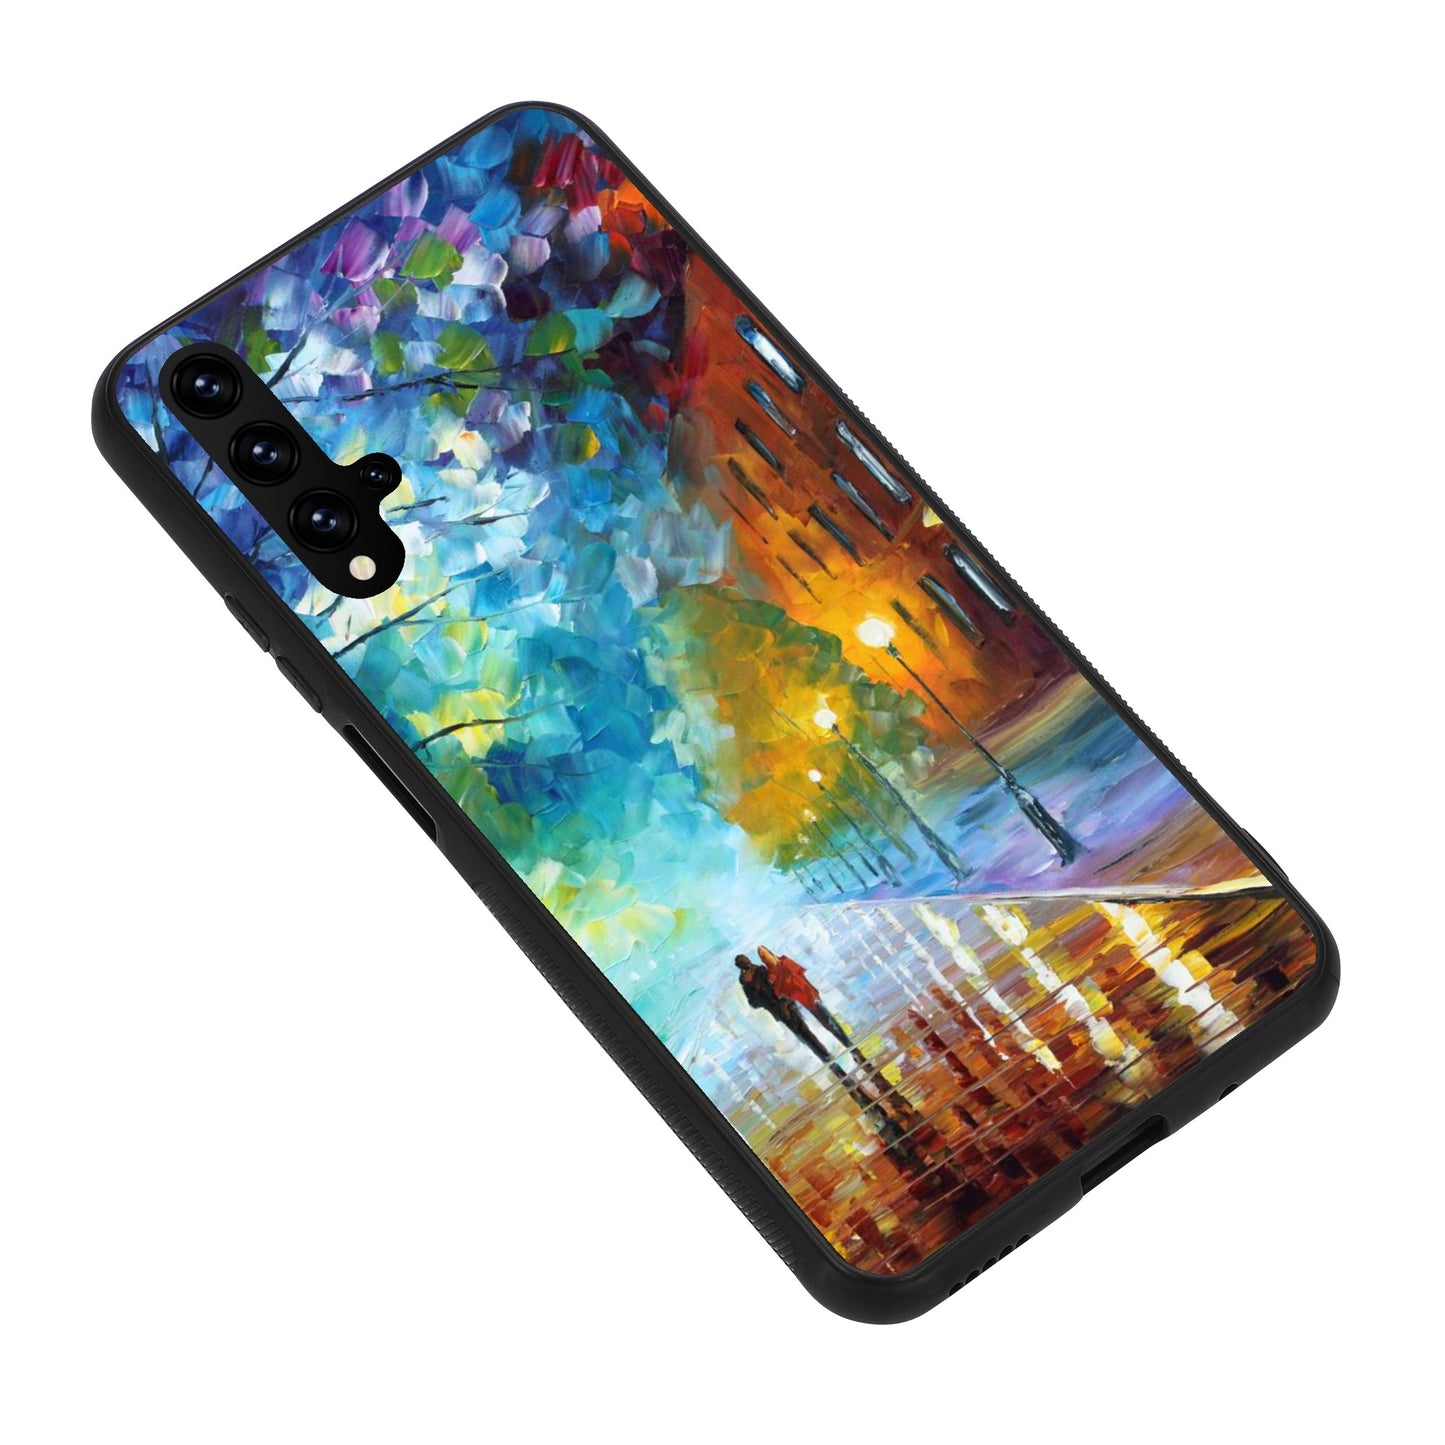 Huawei Honor 10/20/30 Phone Case Afremov FRESHNESS OF COLD